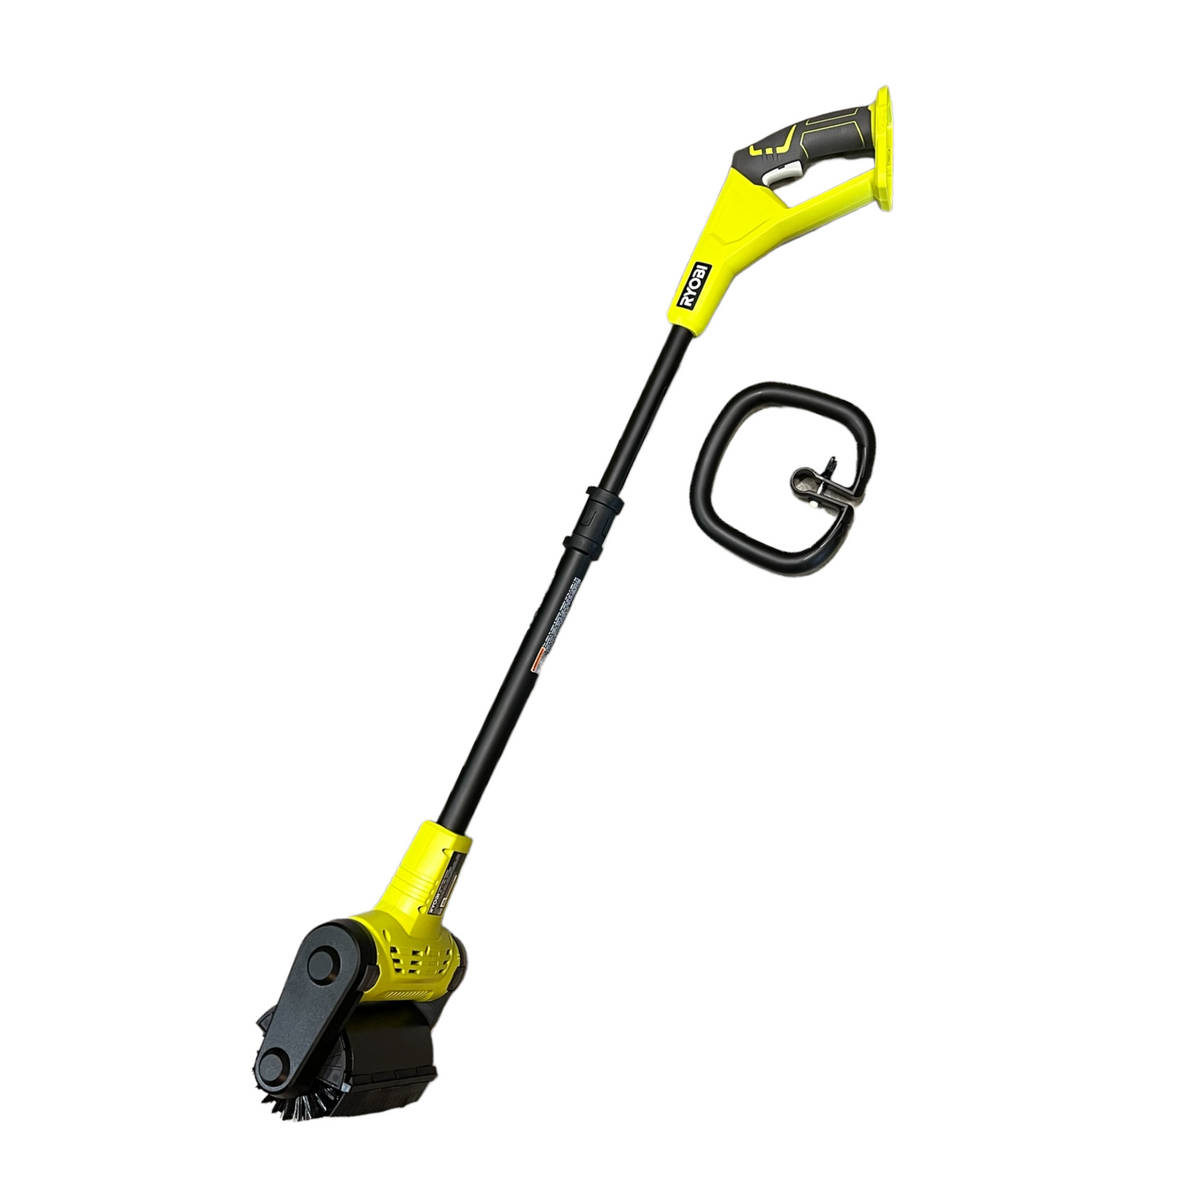 Ramdhanny's True Value - This handy cordless sweeper will make any outdoor  clean up a breeze! #weekendcleaning #cordlesstools #newproduct